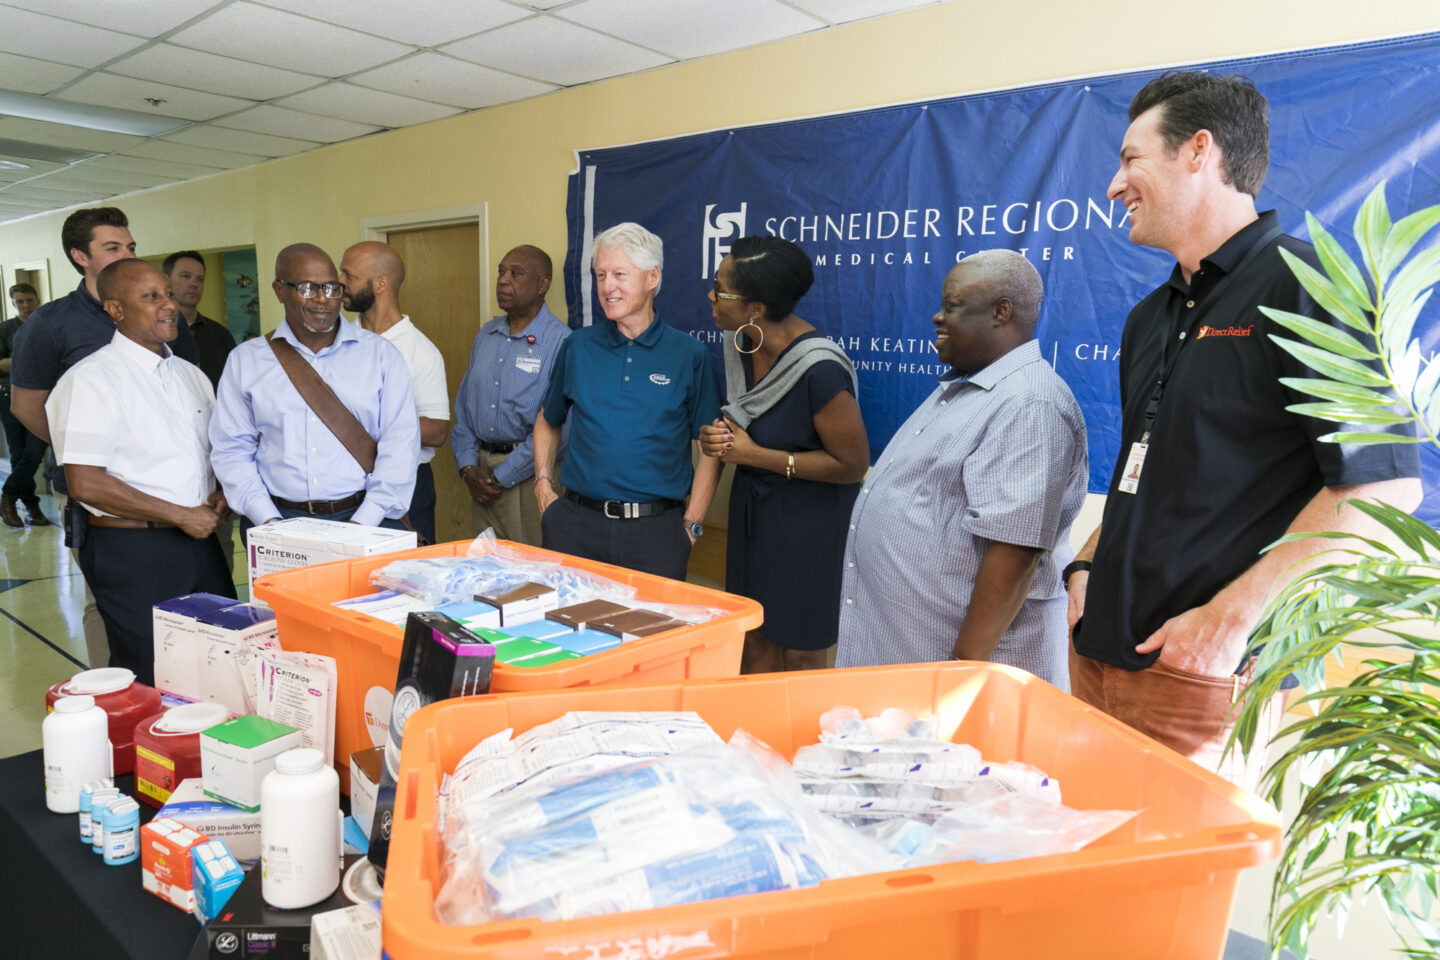 President Clinton visits a medical center in the U.S. Virgin Islands